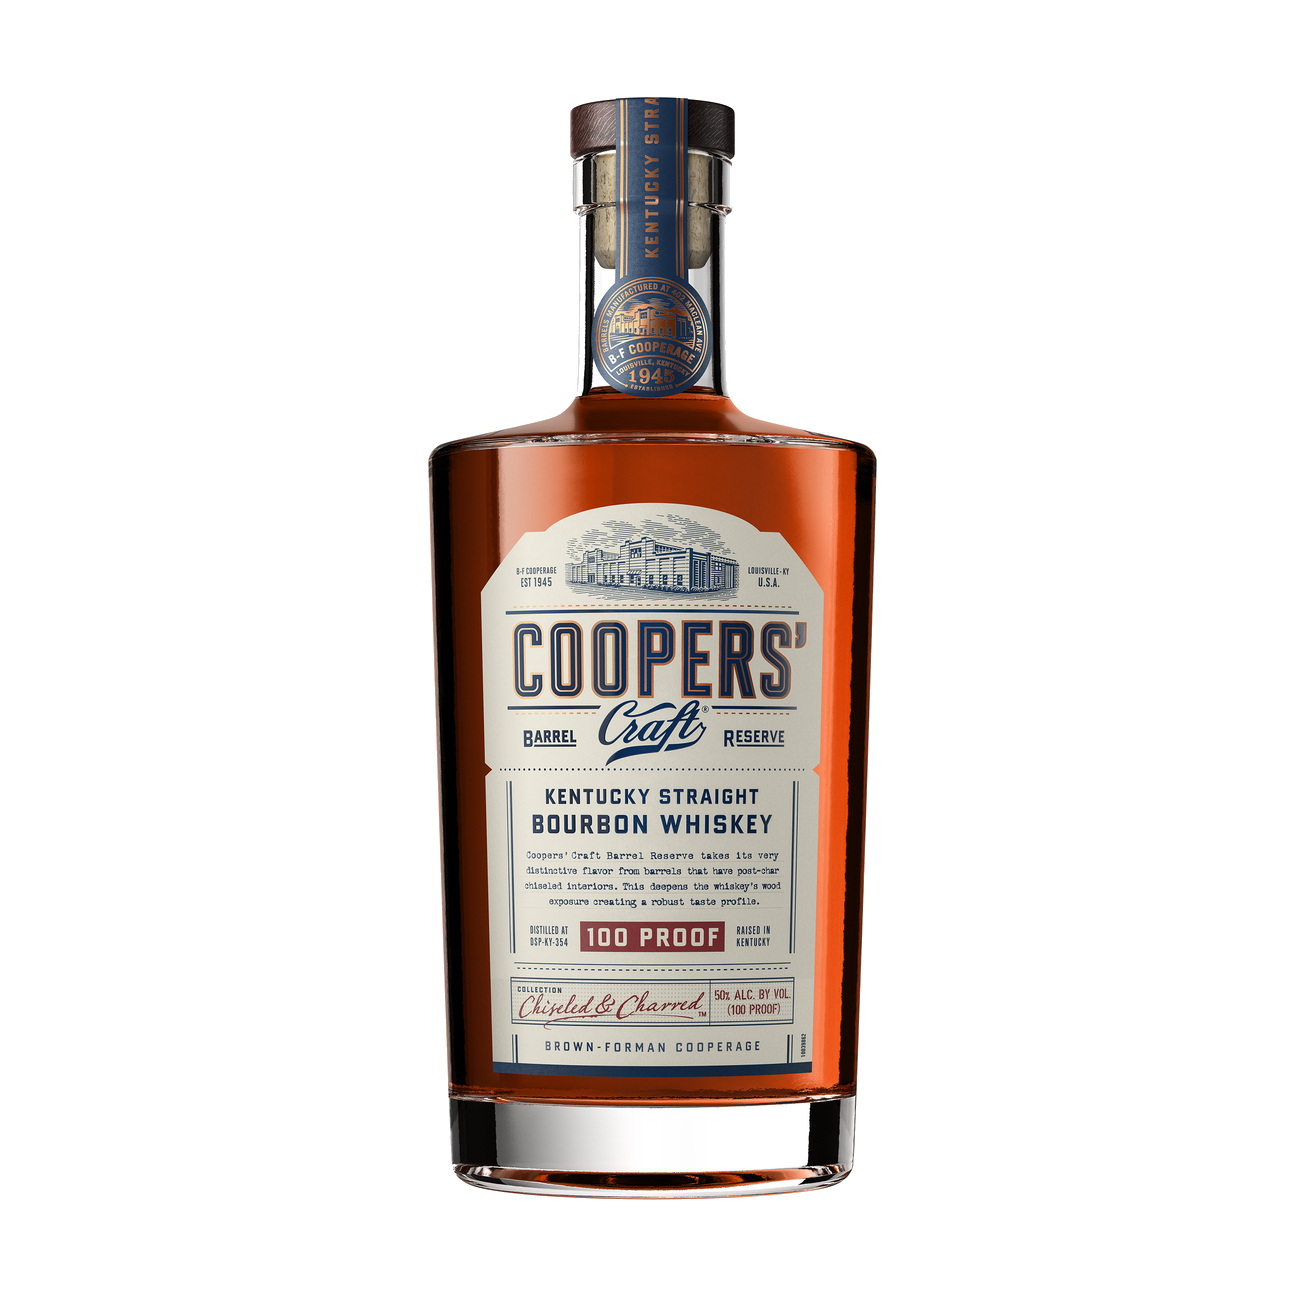 Coopers' Craft Kentucky Straight Bourbon Whiskey 100 Proof 750ml